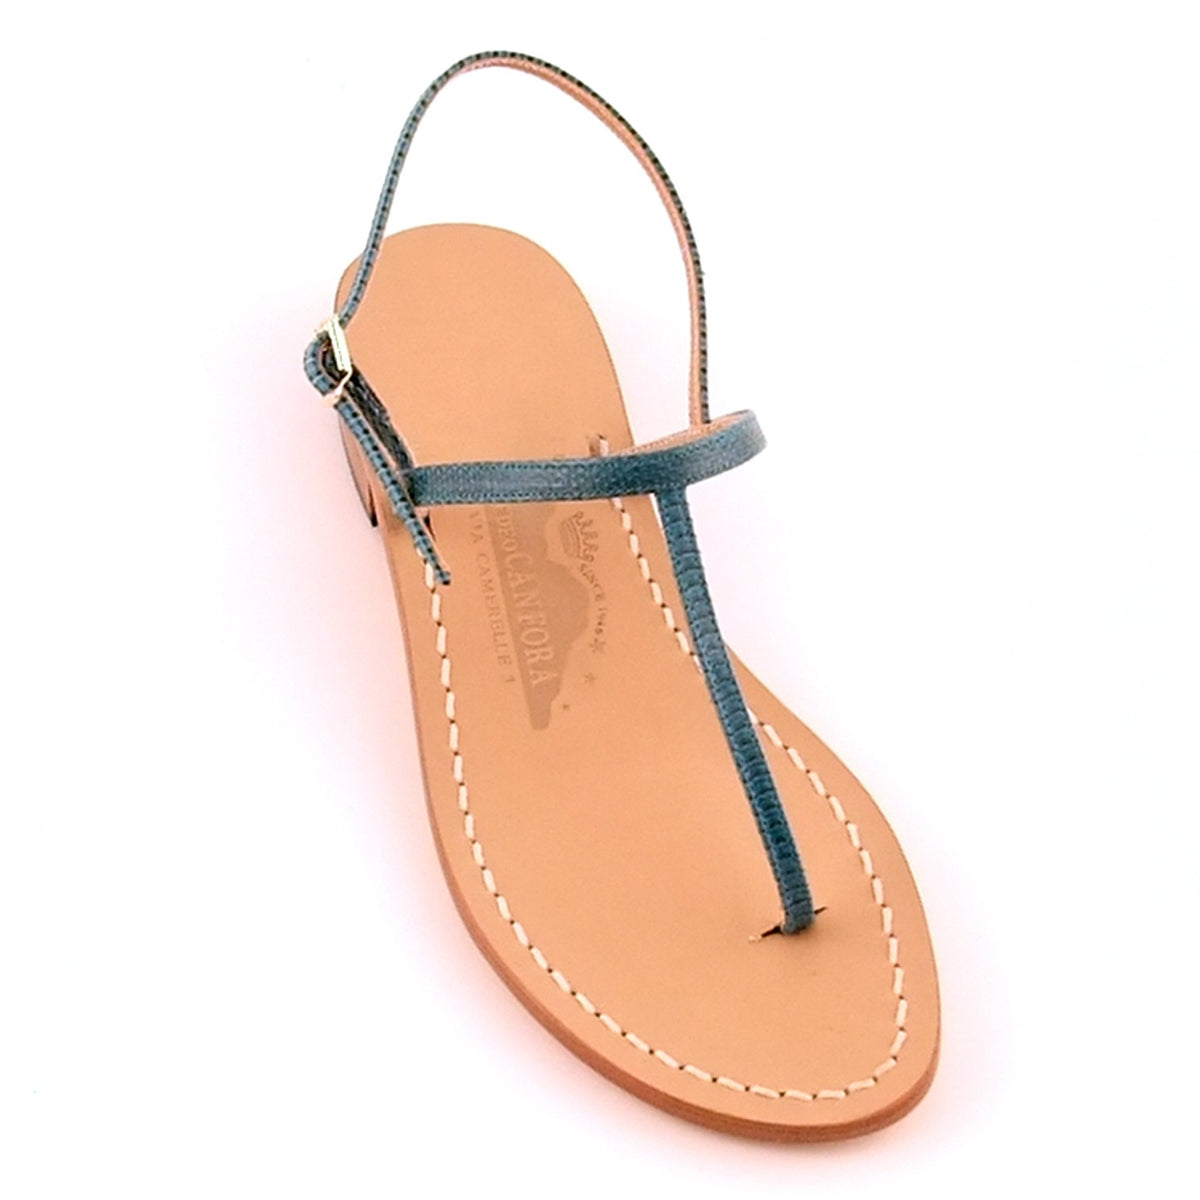 Gail Lizard - Capri Handcrafted Sandals from Italy – Canfora.com